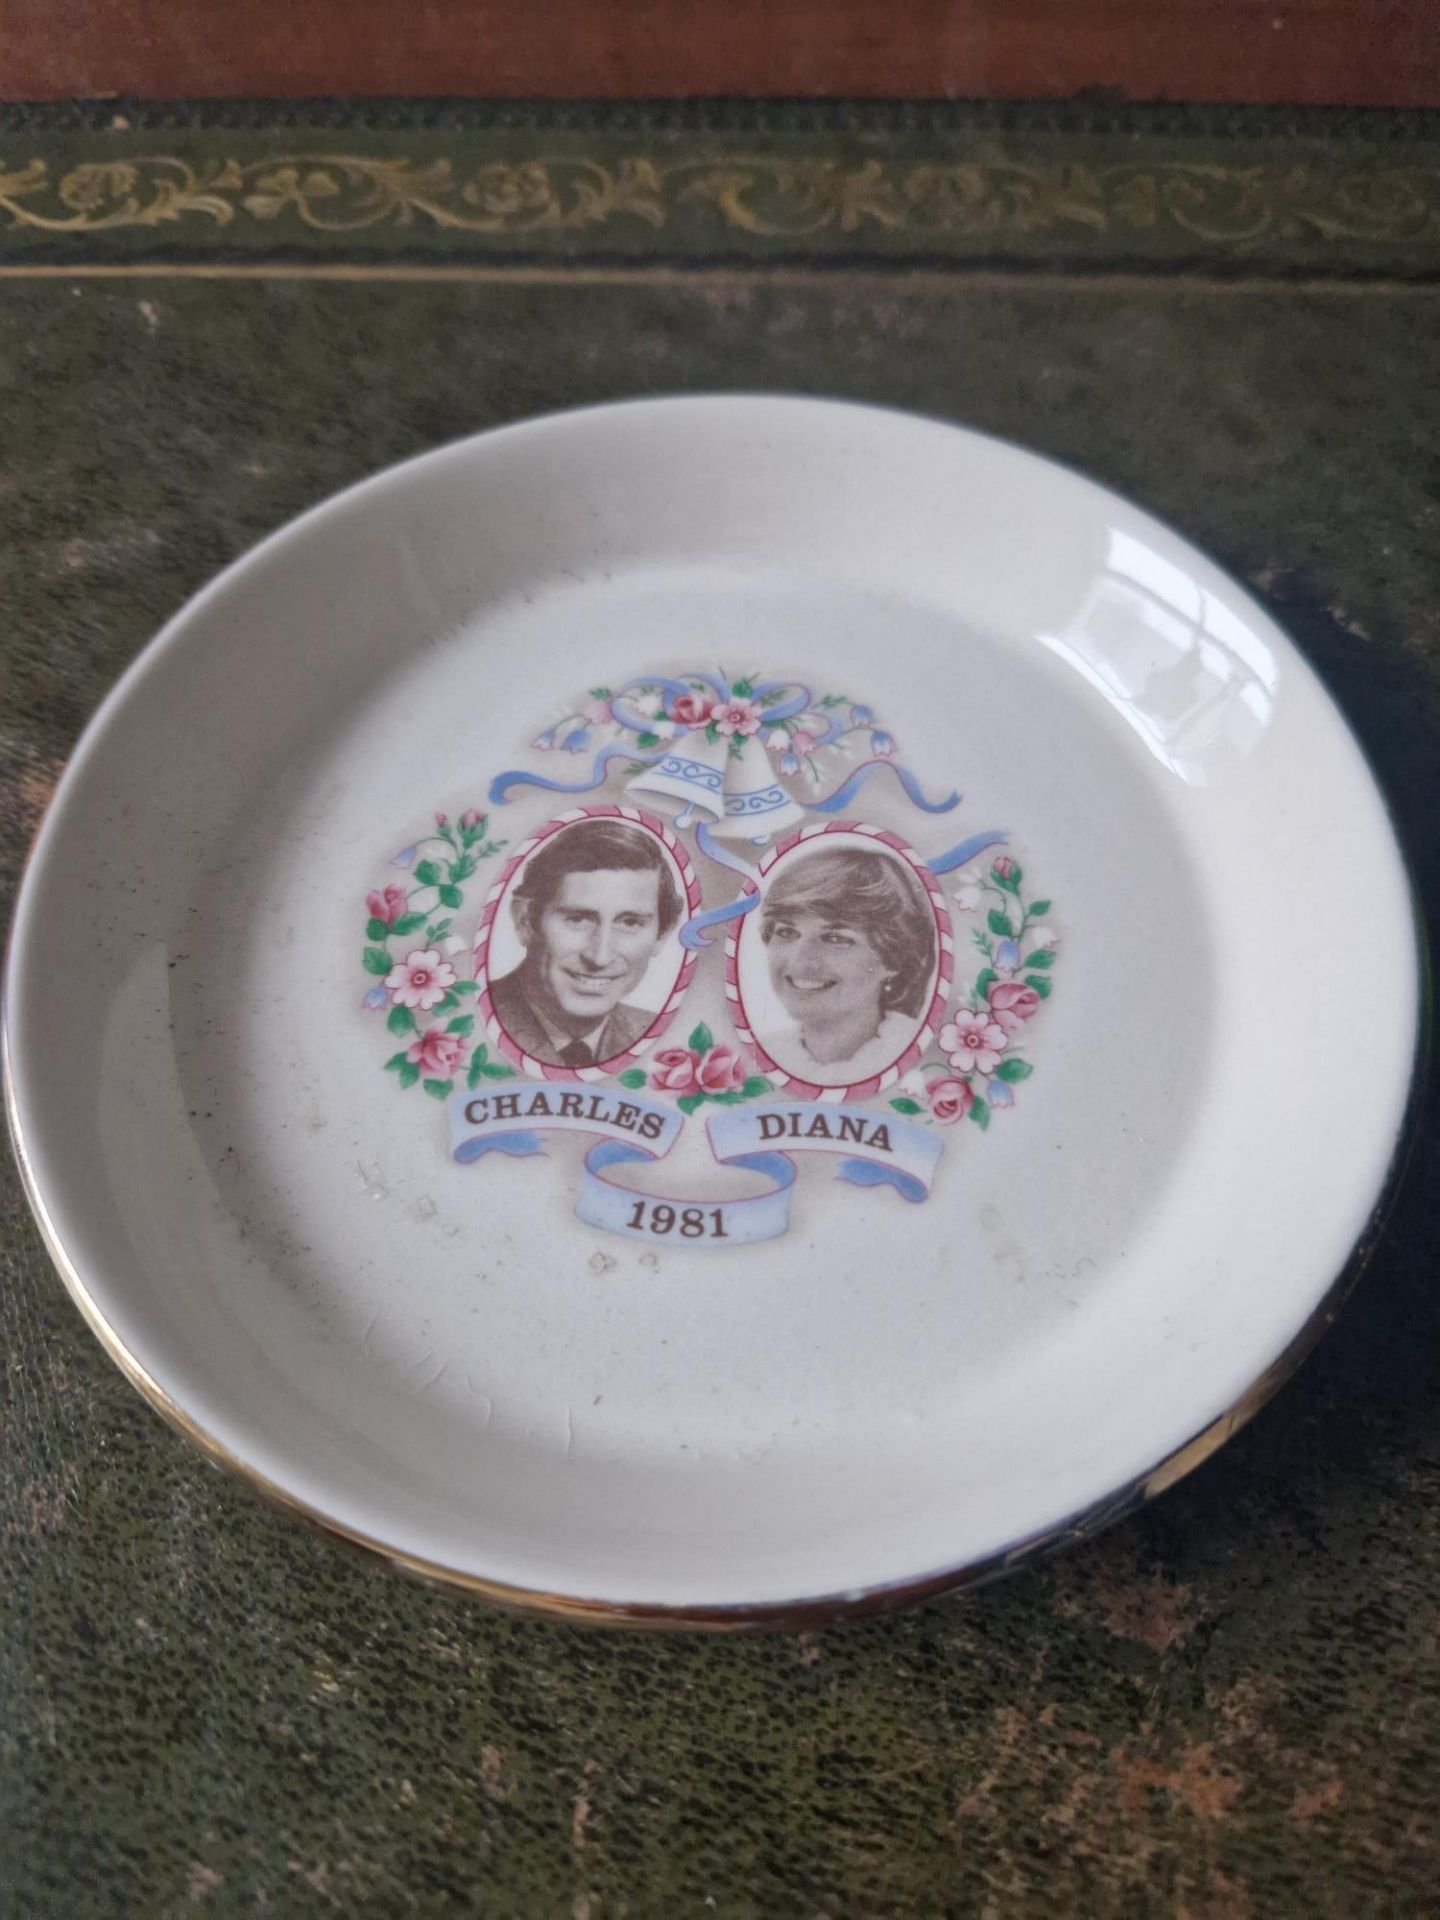 Charles & Diana 1981 Small plate